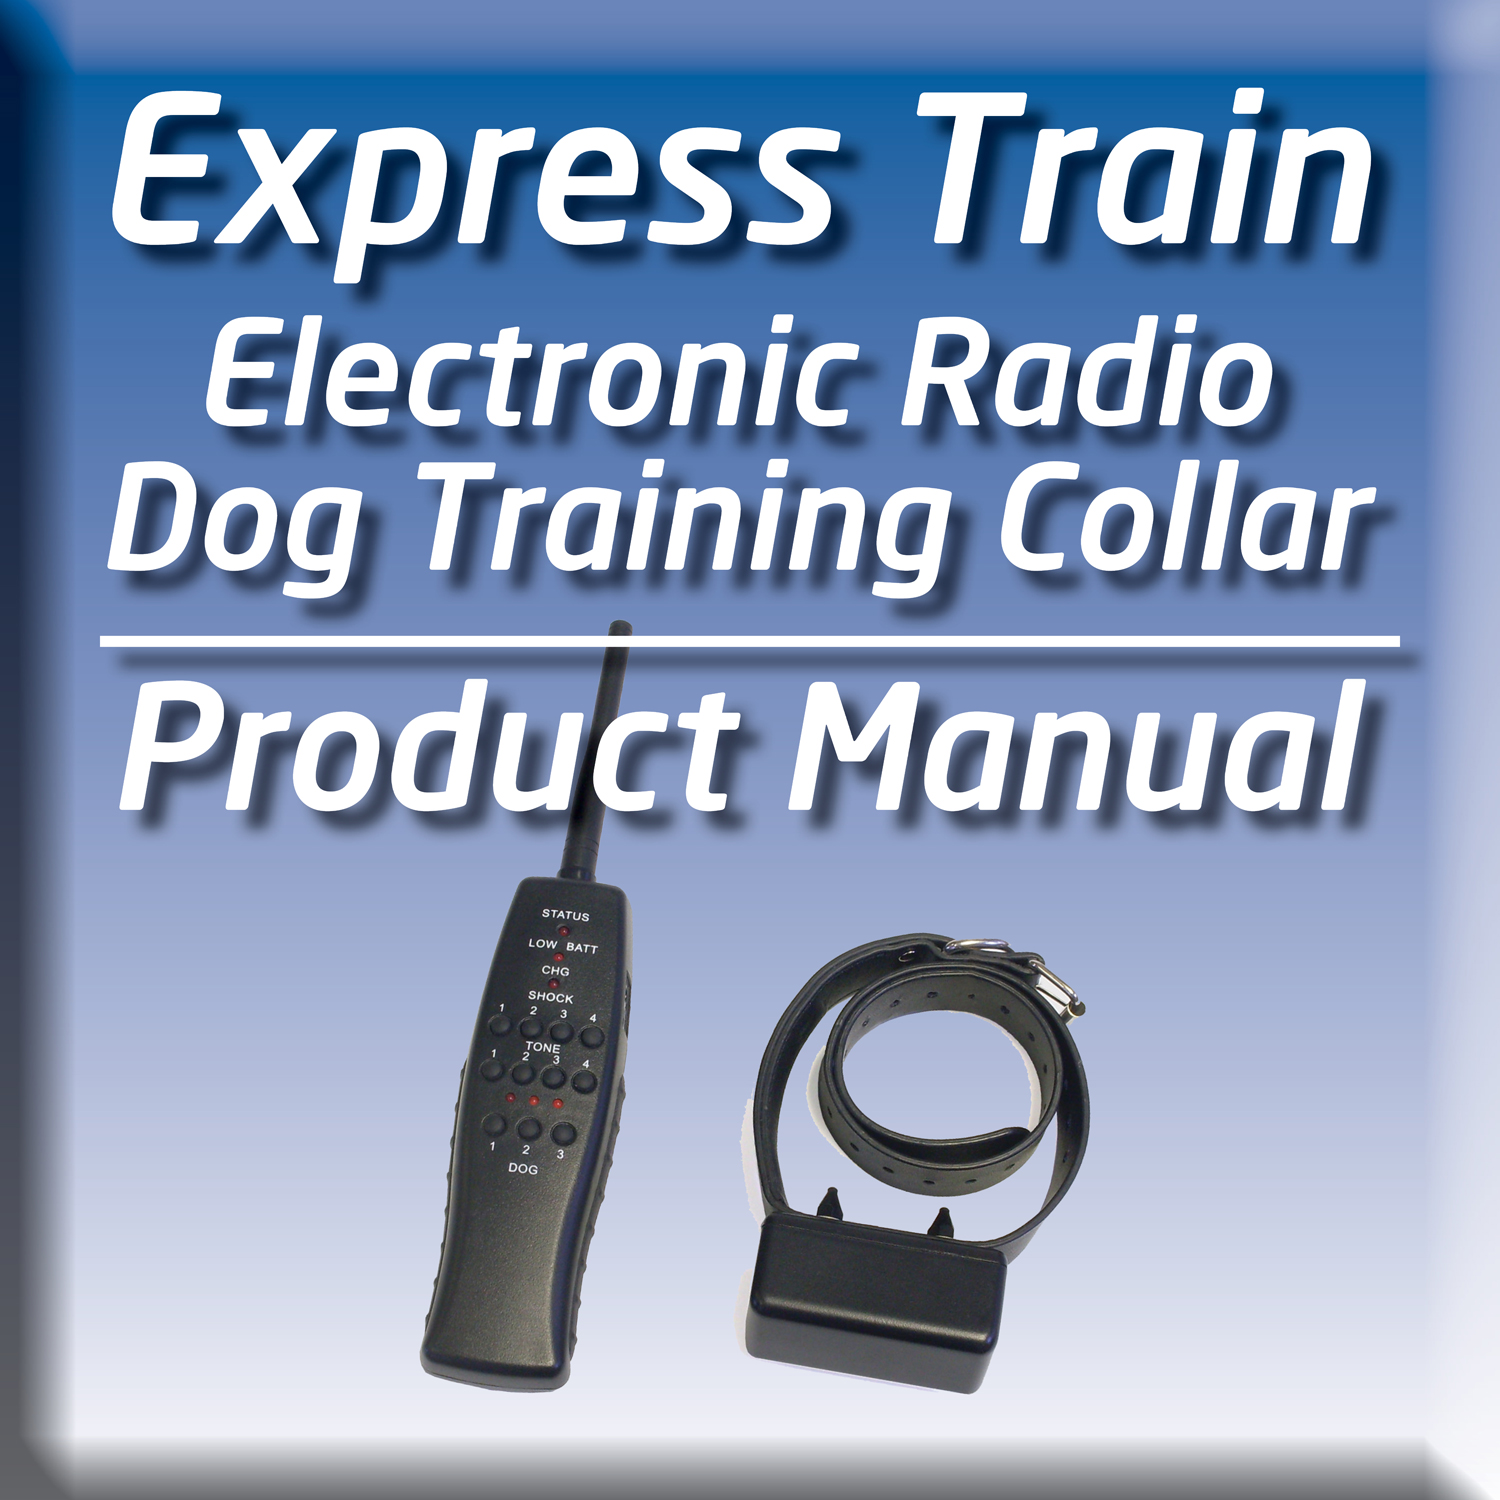 Having trouble? Our electronic pet products manuals are here for you